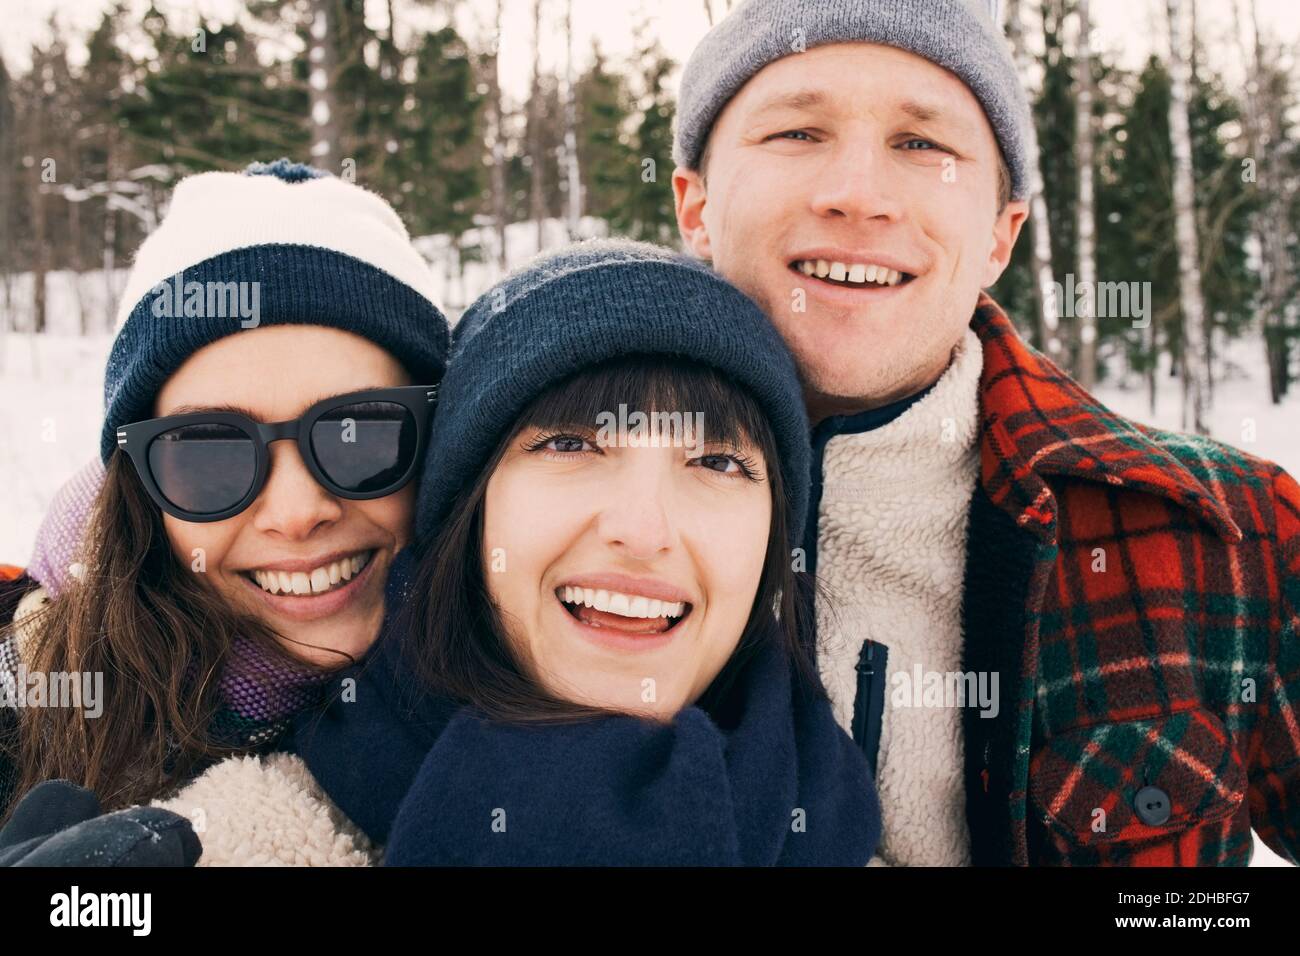 Portrait of cheerful friends wearing knit hats at park during winter Stock Photo